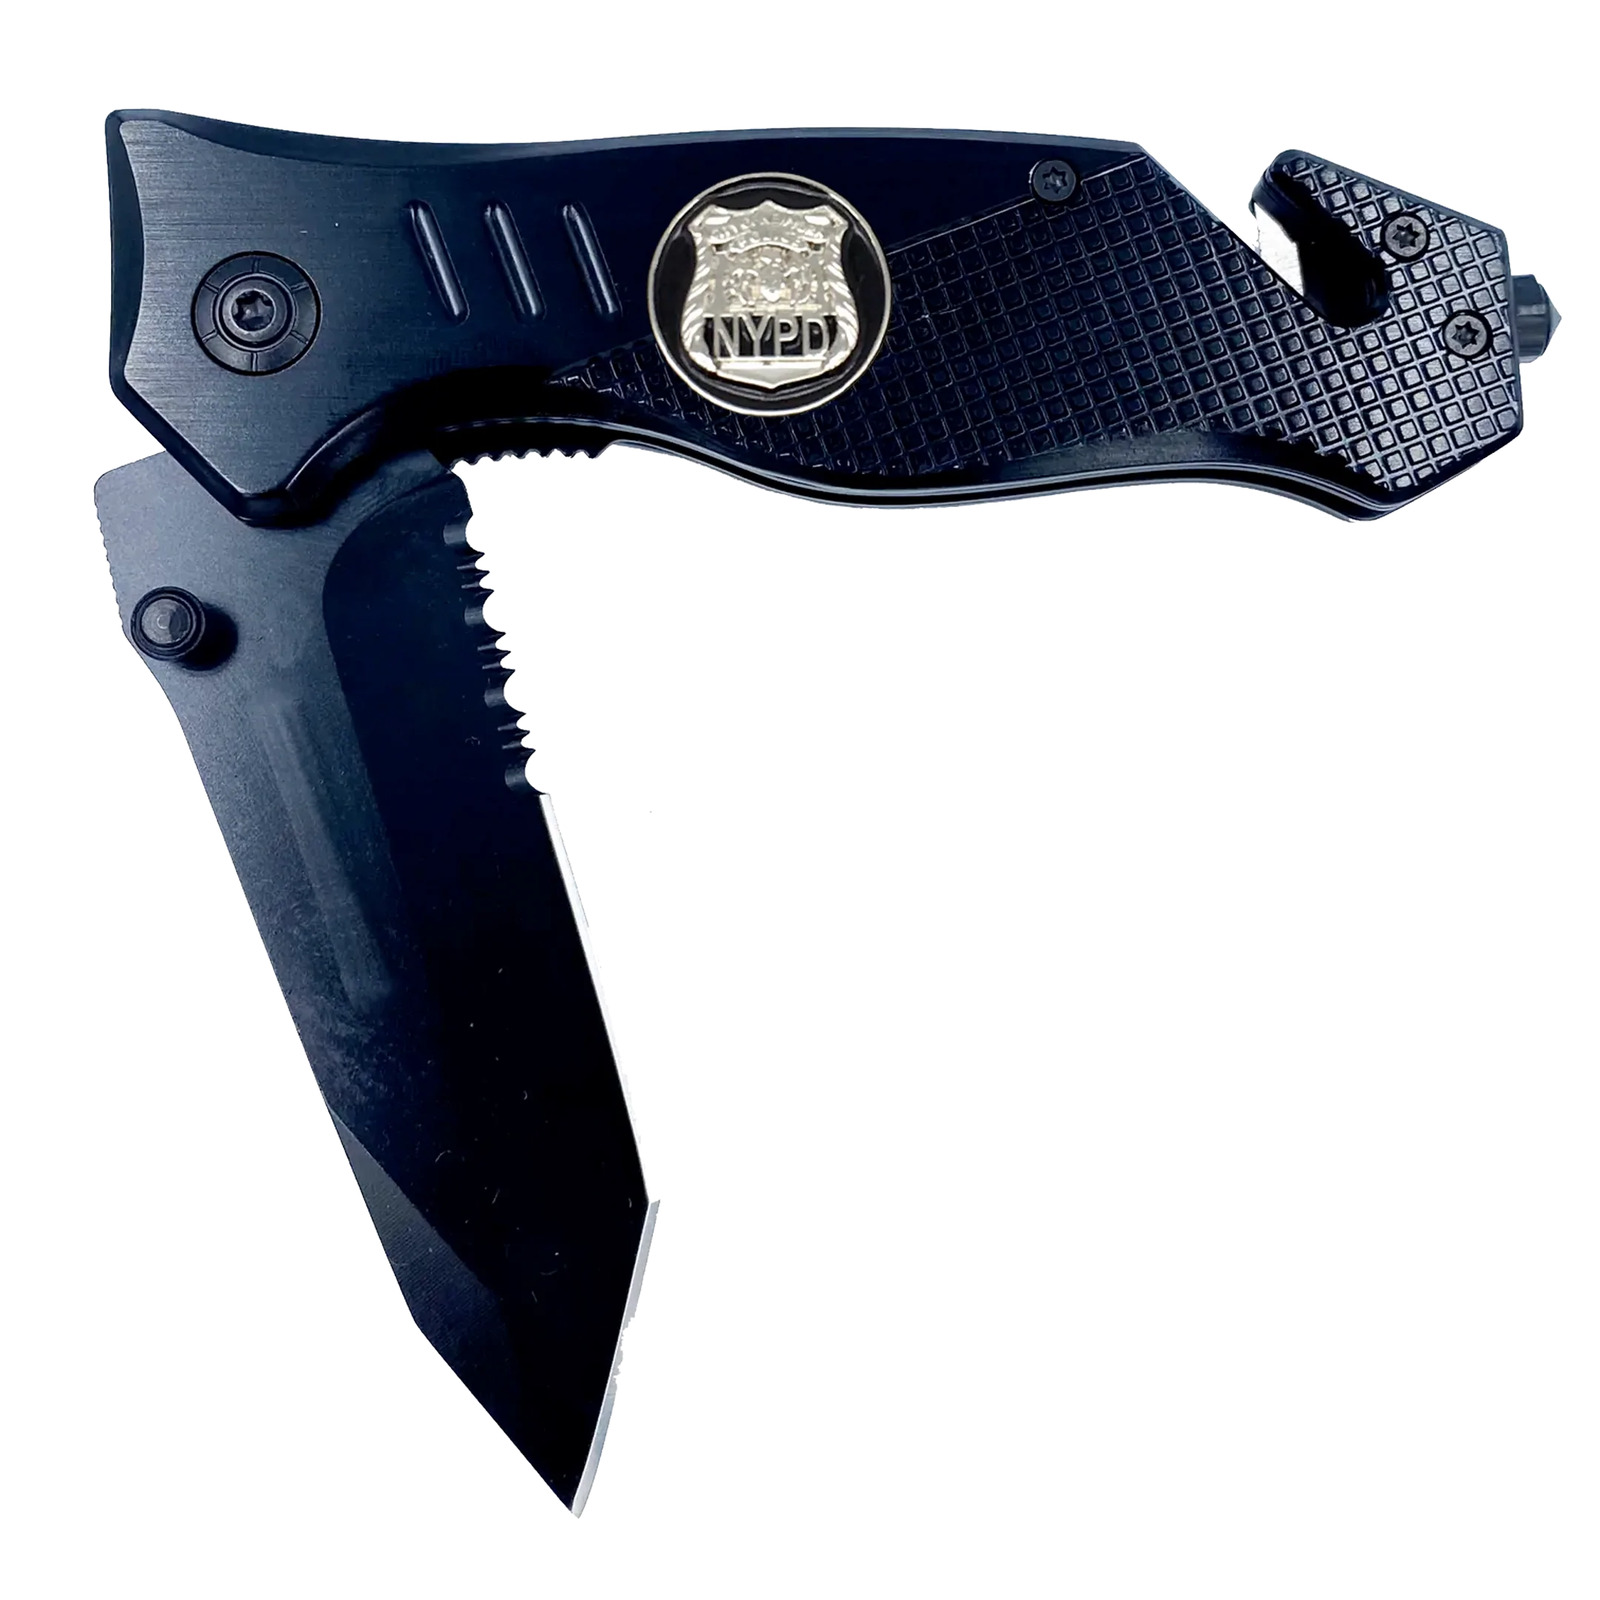 NYPD New York City Police Department Knife 3-in-1 Tactical Rescue knife tool wit